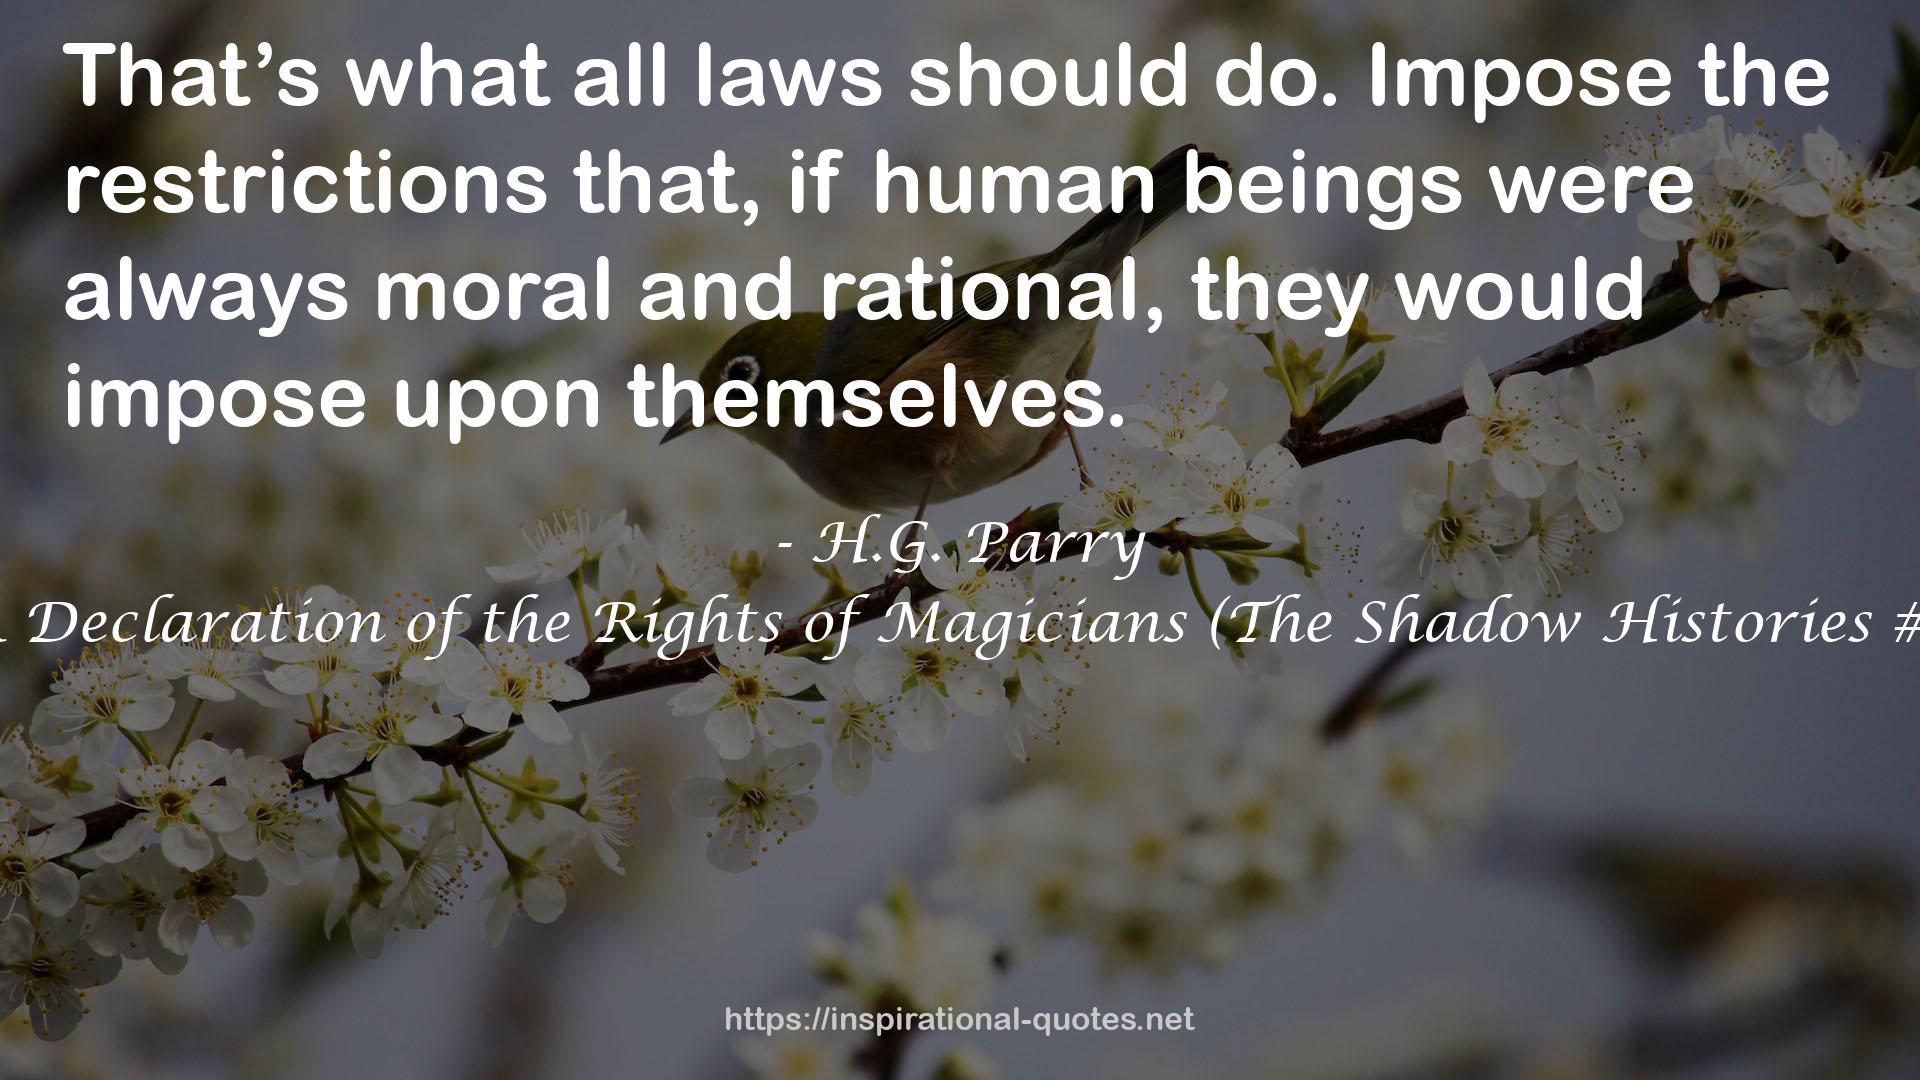 A Declaration of the Rights of Magicians (The Shadow Histories #1) QUOTES